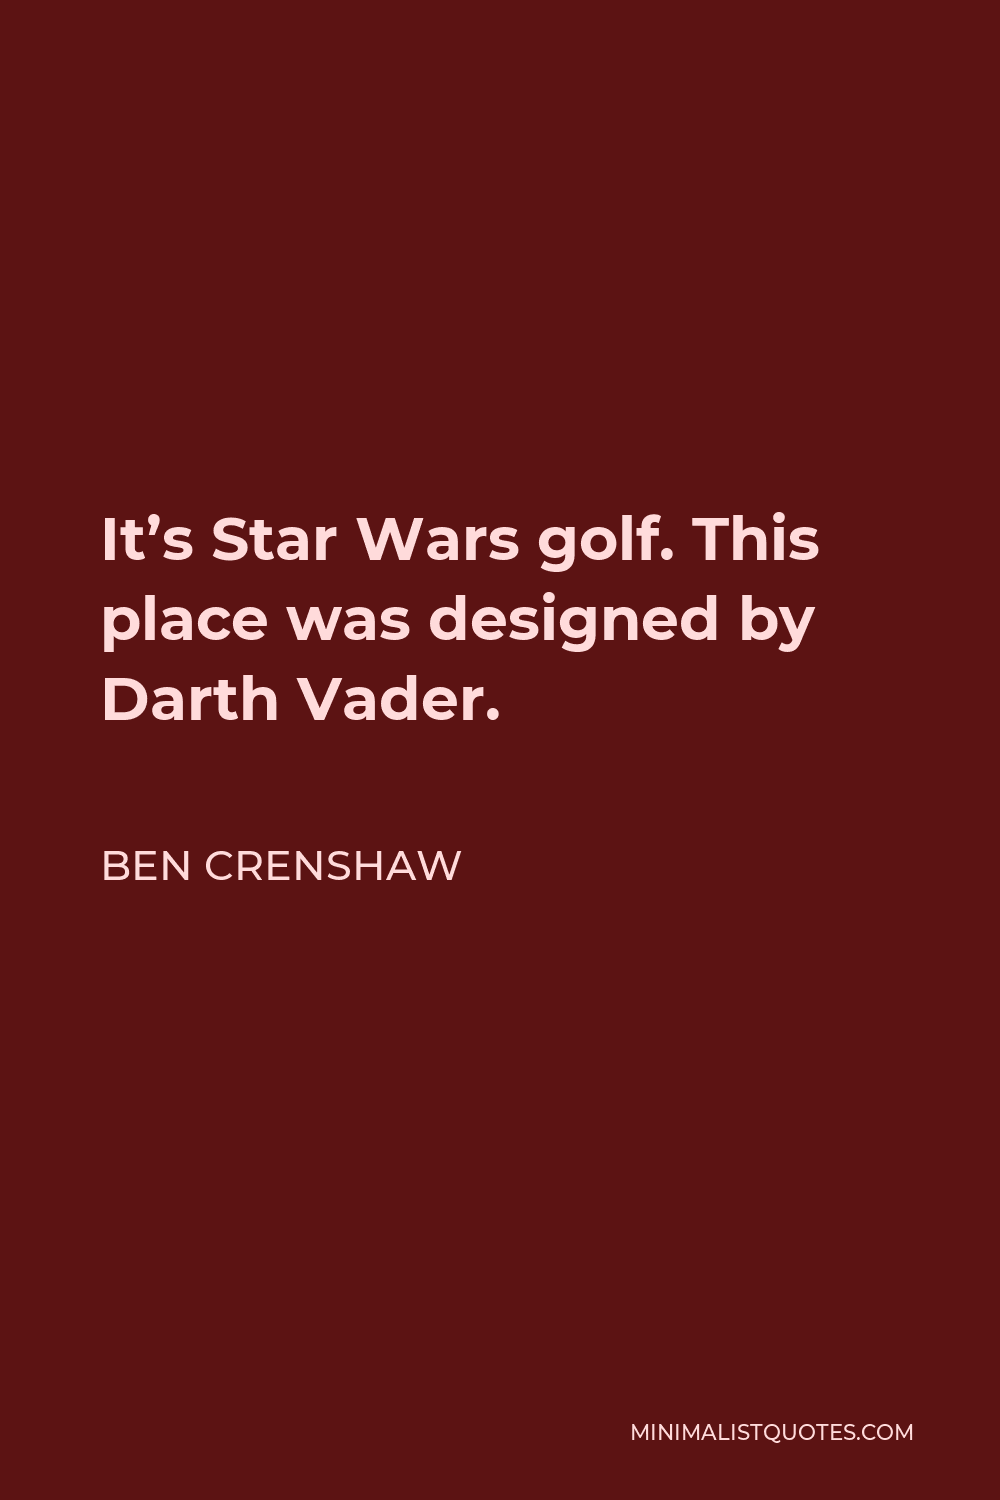 Ben Crenshaw Quote - It’s Star Wars golf. This place was designed by Darth Vader.